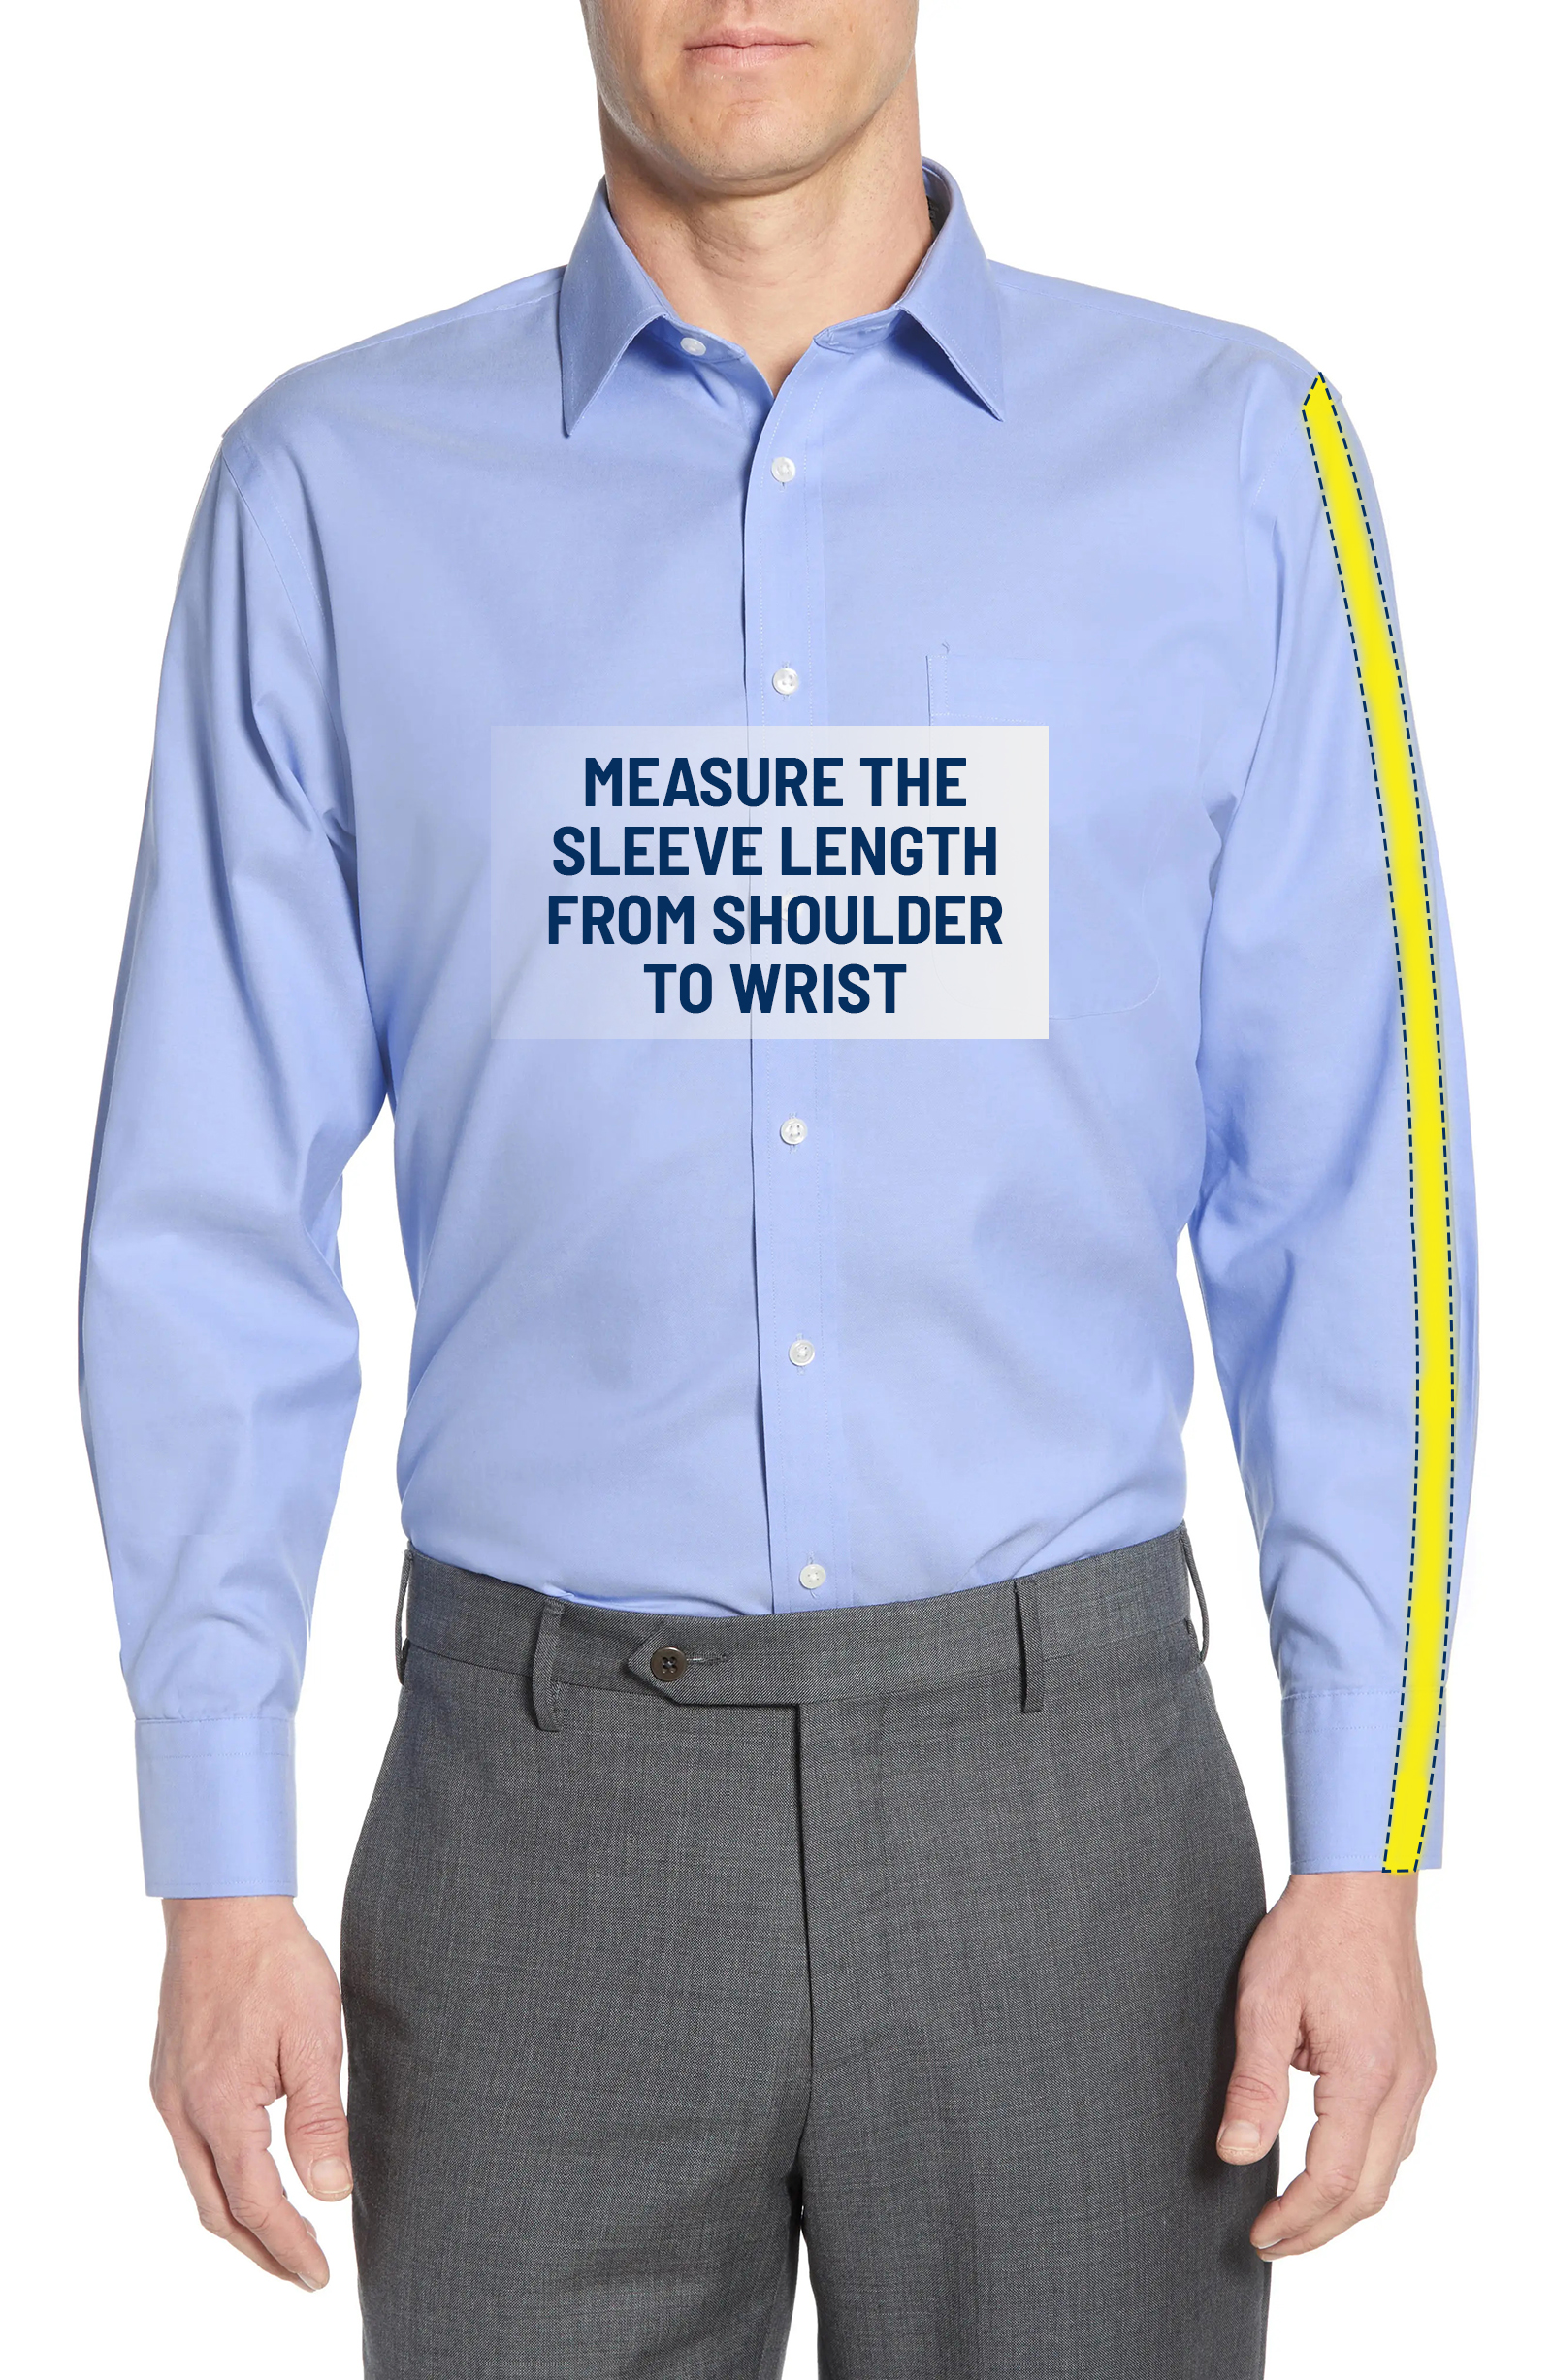 Measure from shoulder to wrist to determine the suit jacket's sleeve length